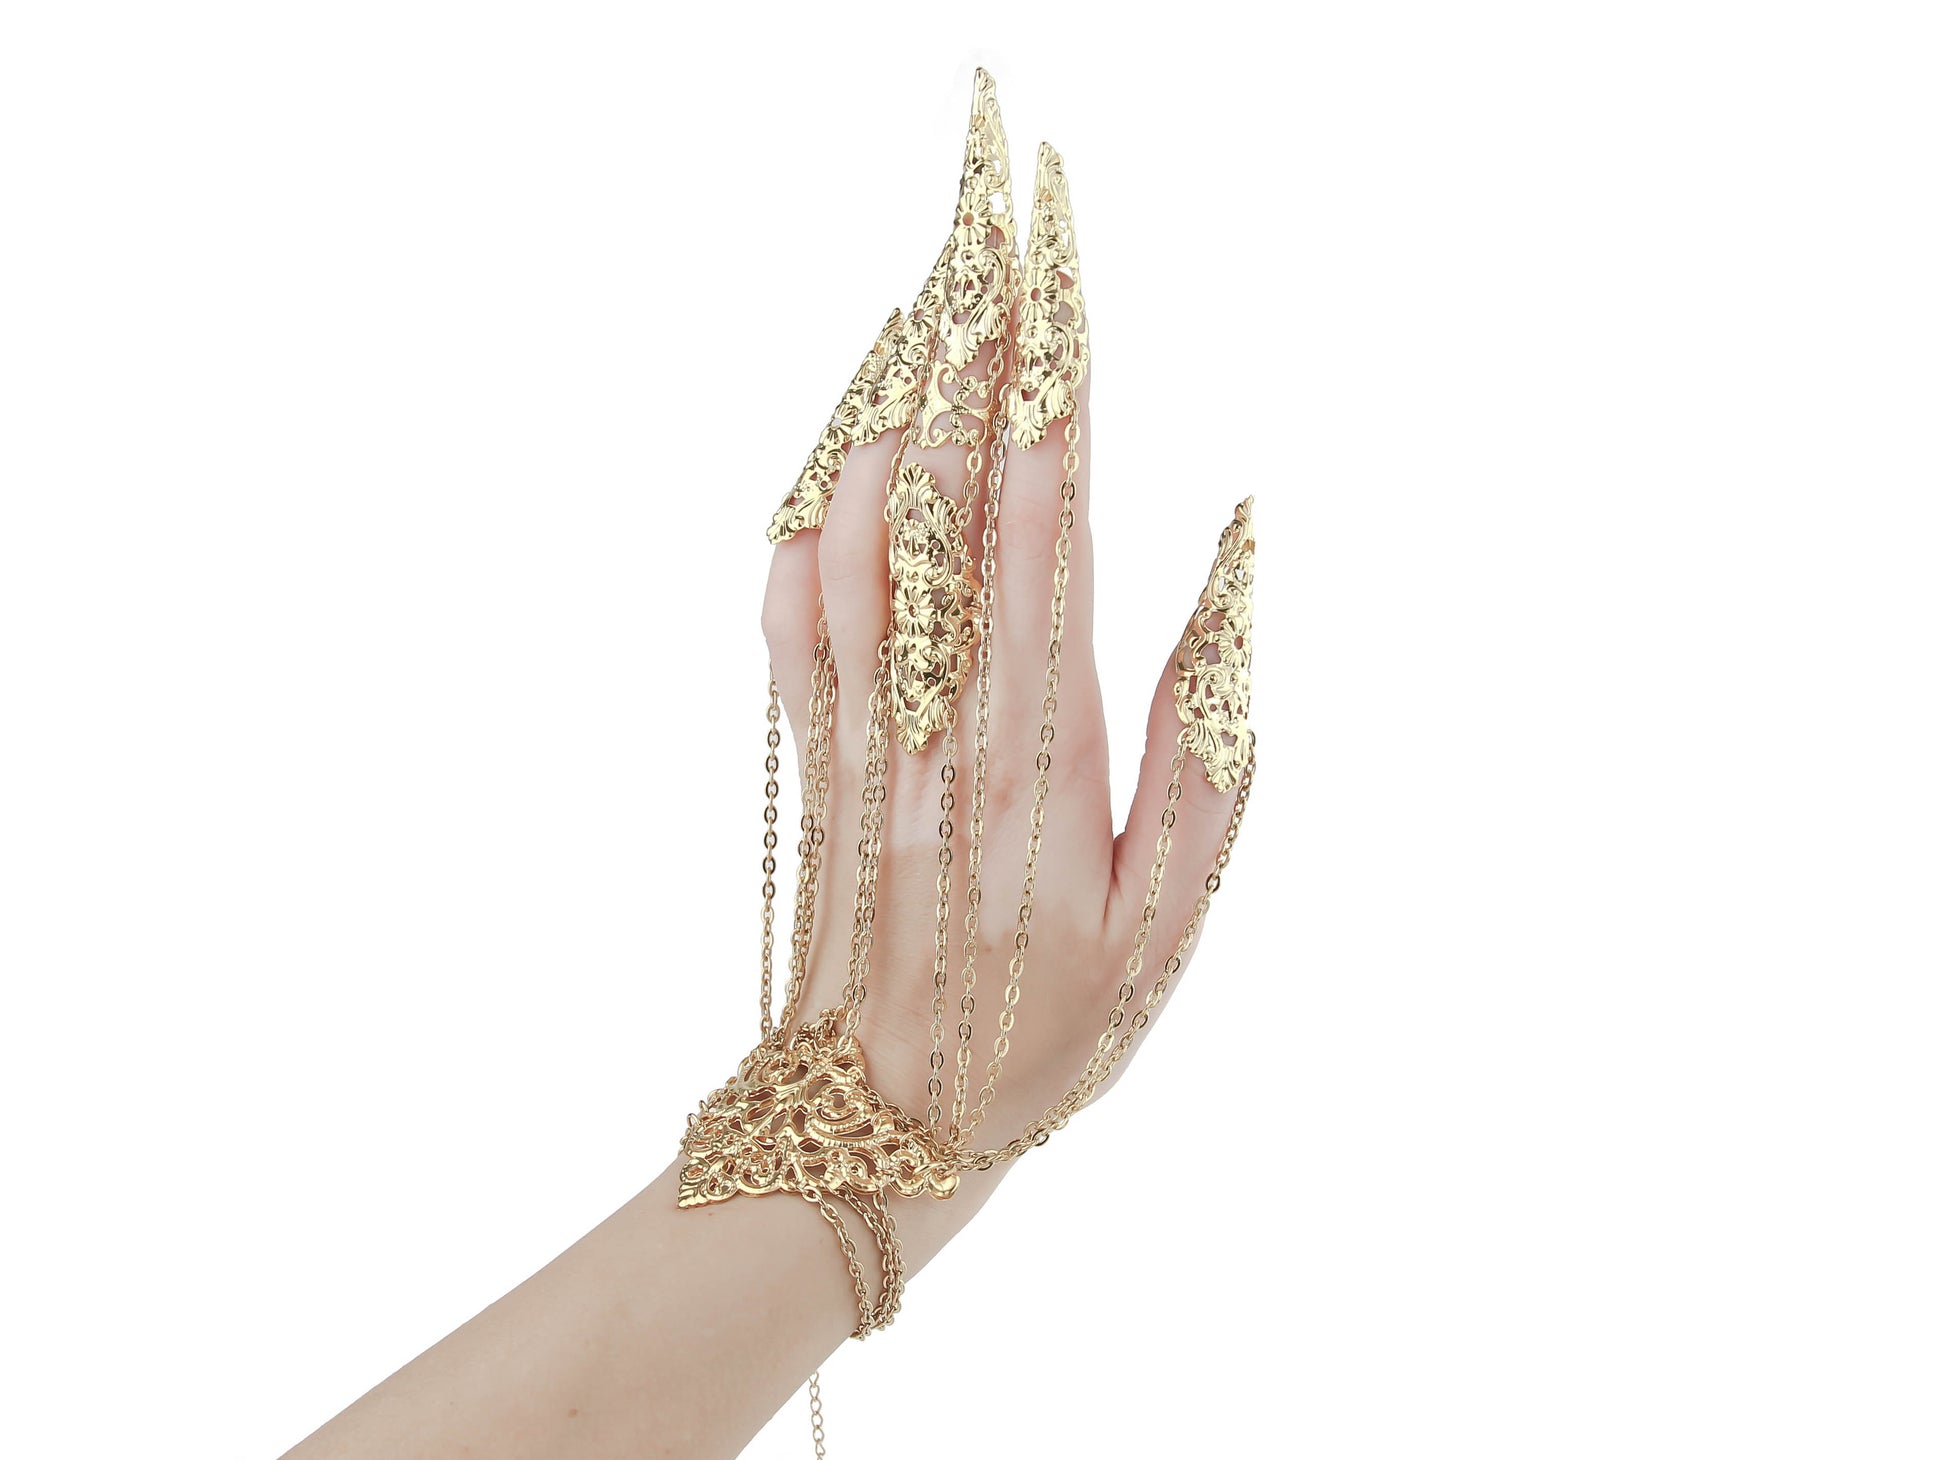 An elegant hand displays a Myril Jewels gold hand chain bracelet with intricate gold claws, epitomizing the neo-goth style. This piece is perfect for those who favor dark avant-garde accessories, blending Halloween and gothic-chic aesthetics for a unique statement in everyday or festival attire